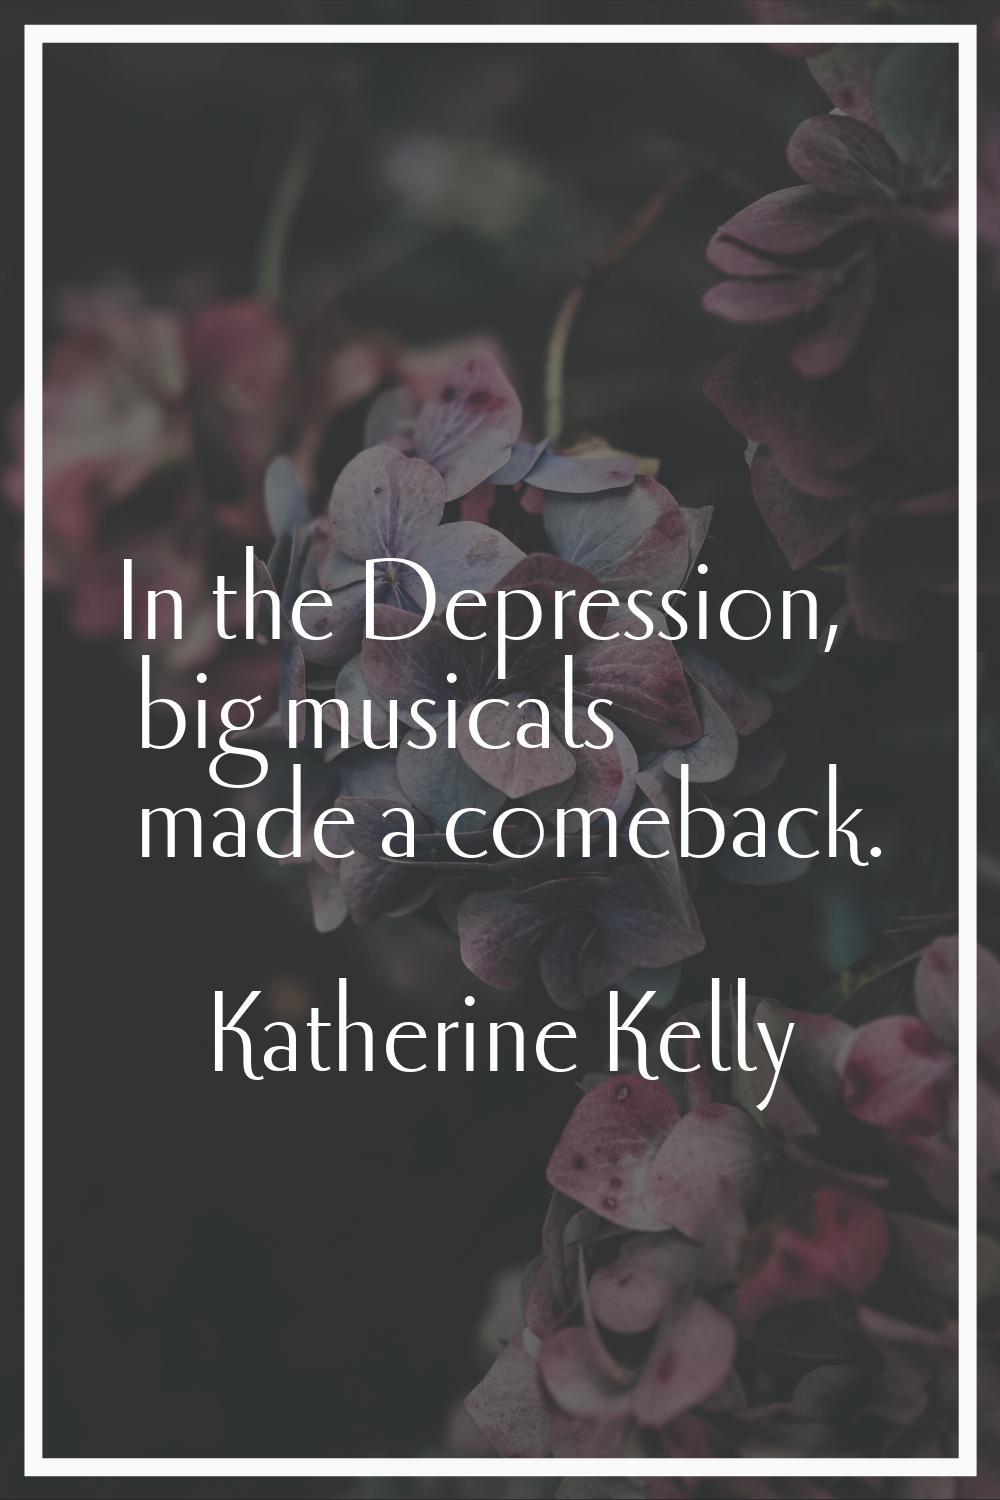 In the Depression, big musicals made a comeback.